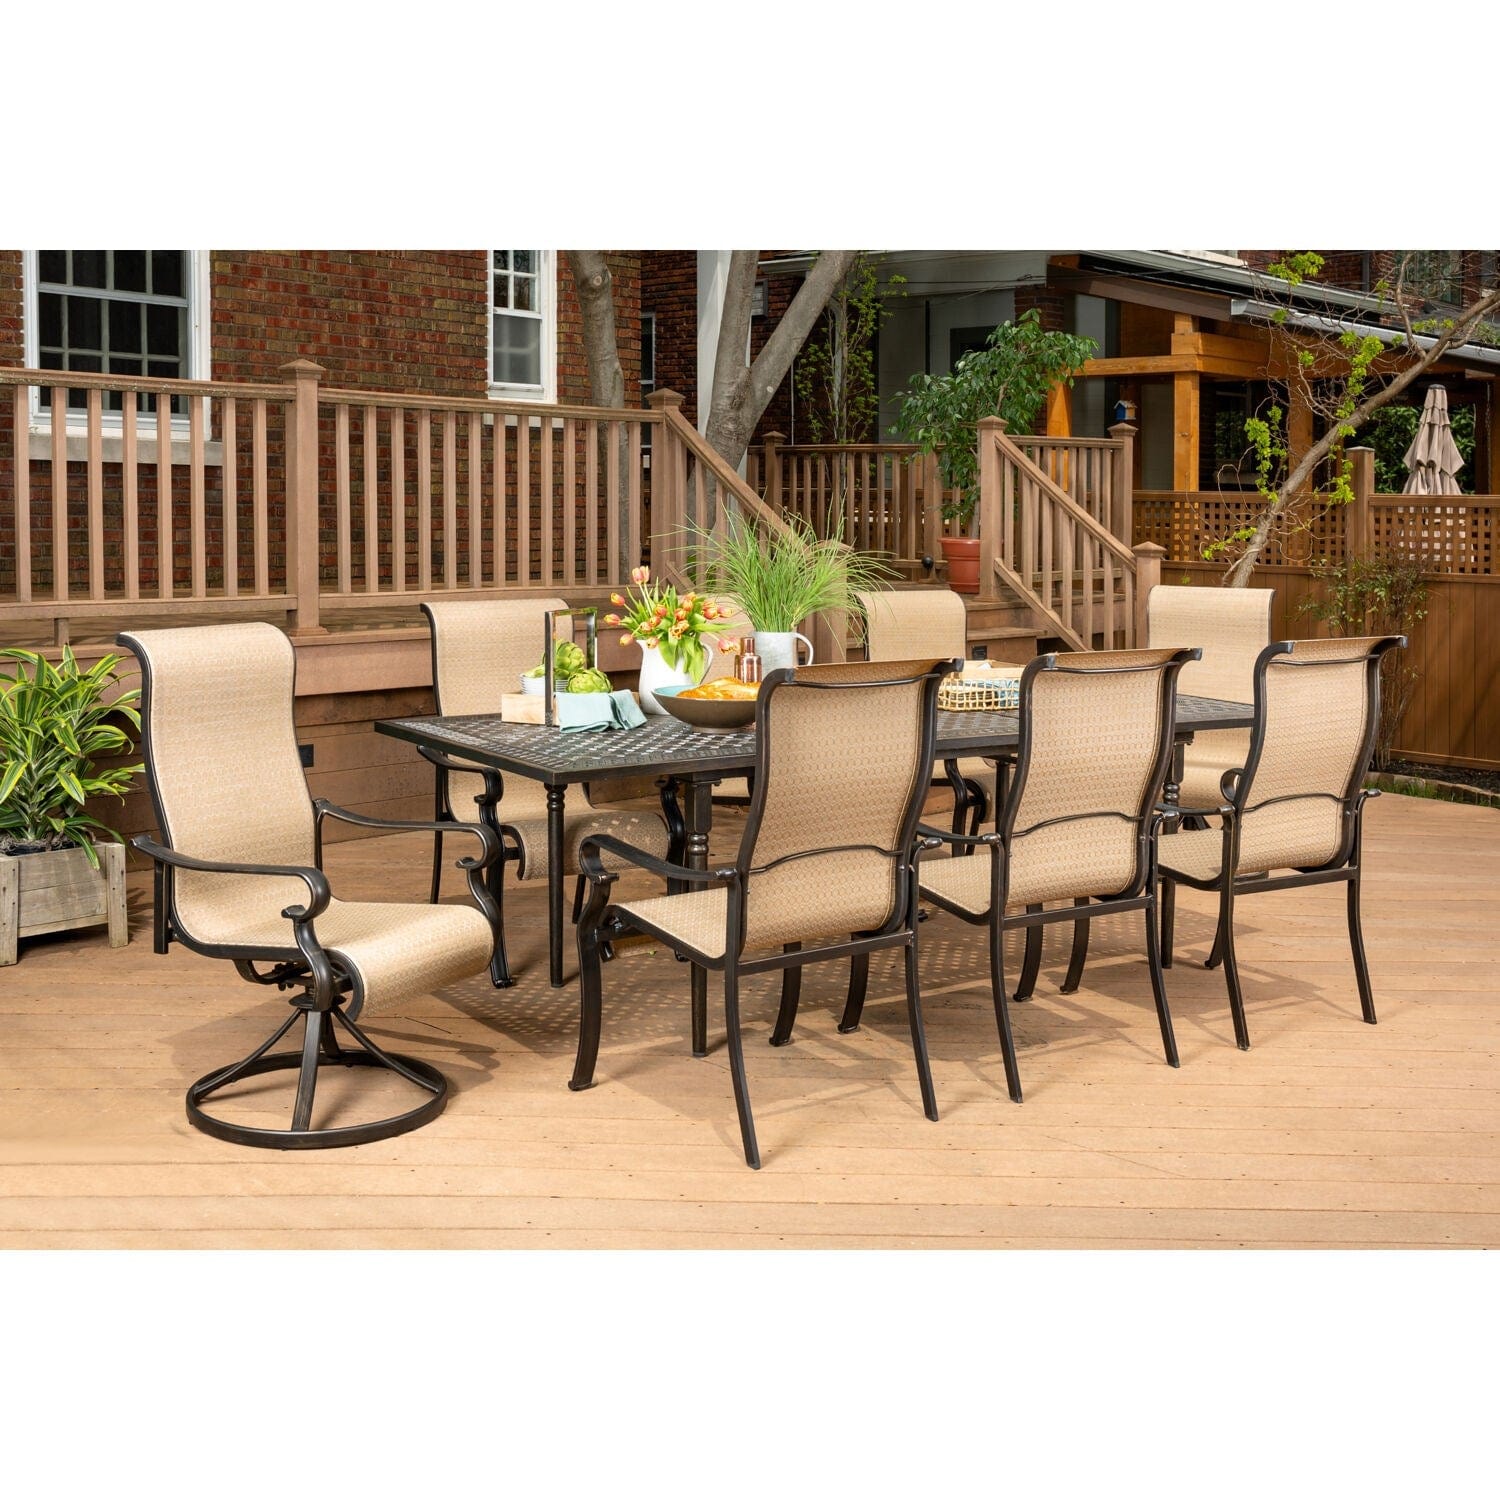 Hanover Outdoor Dining Set Hanover Brigantine 9-Piece Dining Set with an Expandable Cast-Top Dining Table, 2 Sling Swivel Rockers, and 6 Sling Dining Chairs - BRIGDN9PCSW2-EX